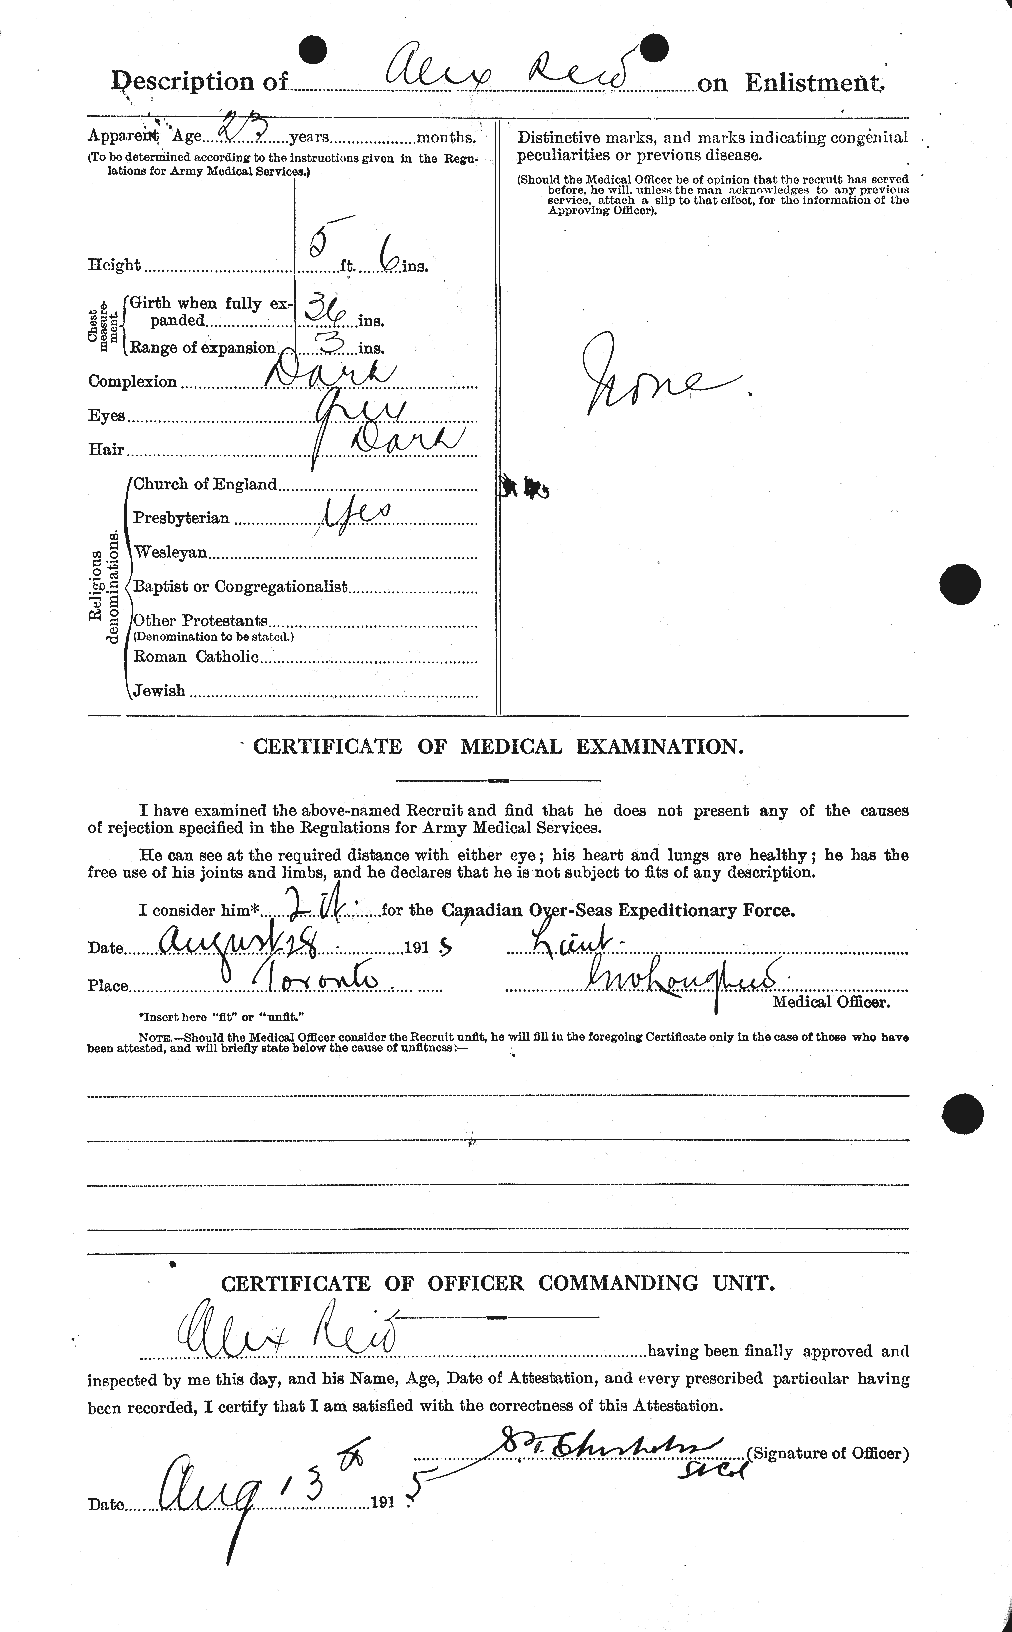 Personnel Records of the First World War - CEF 597753b